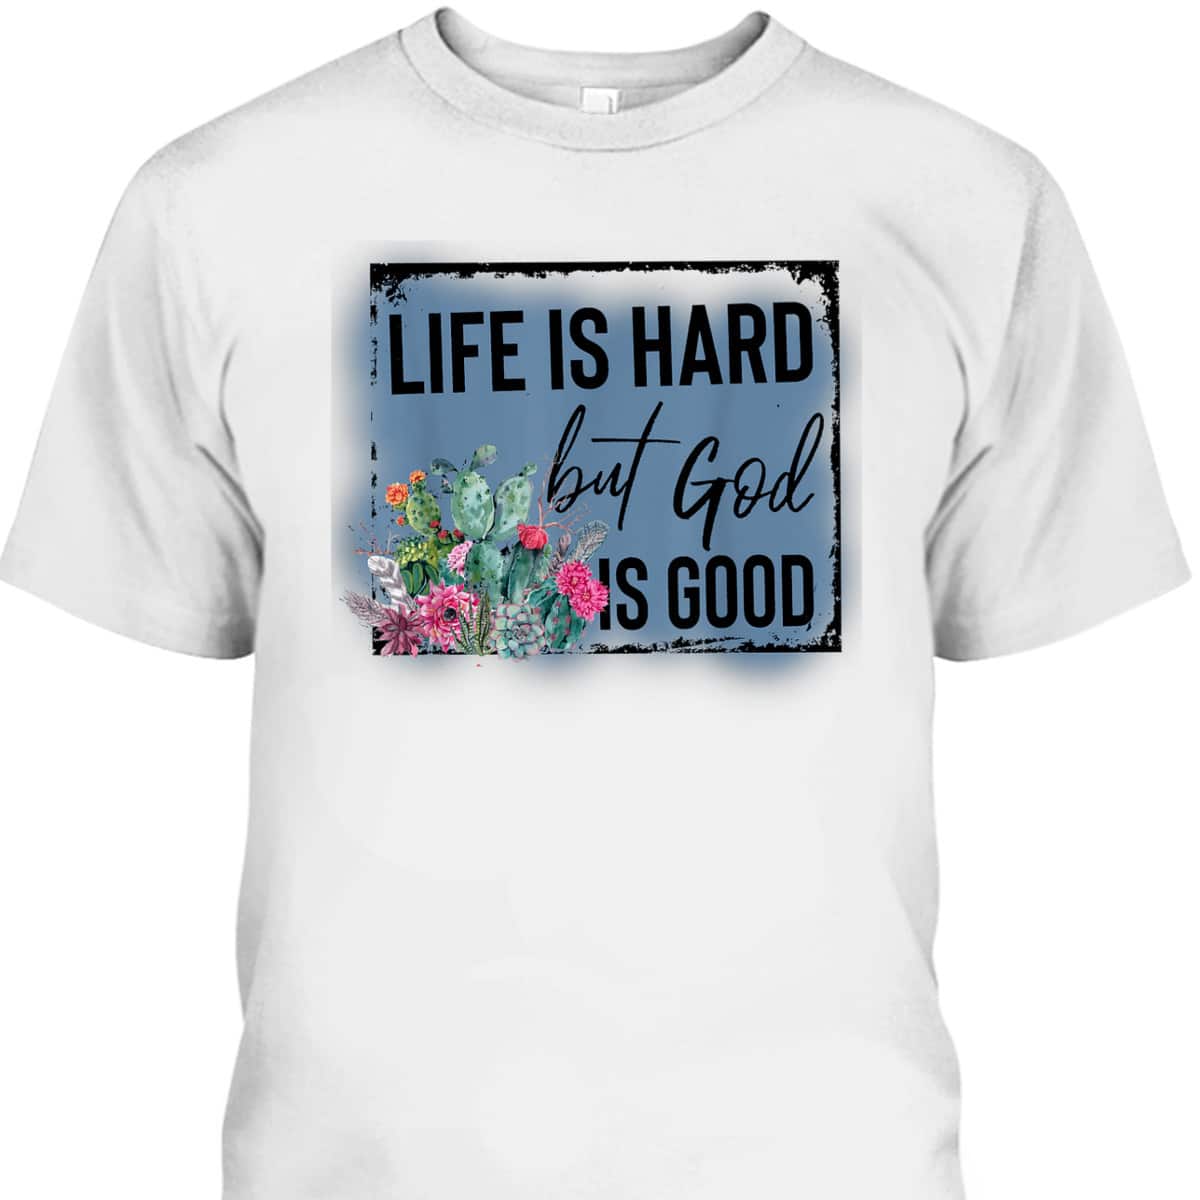 Floral Cactus Life Is Hard God Is Good T-Shirt Christian Gift